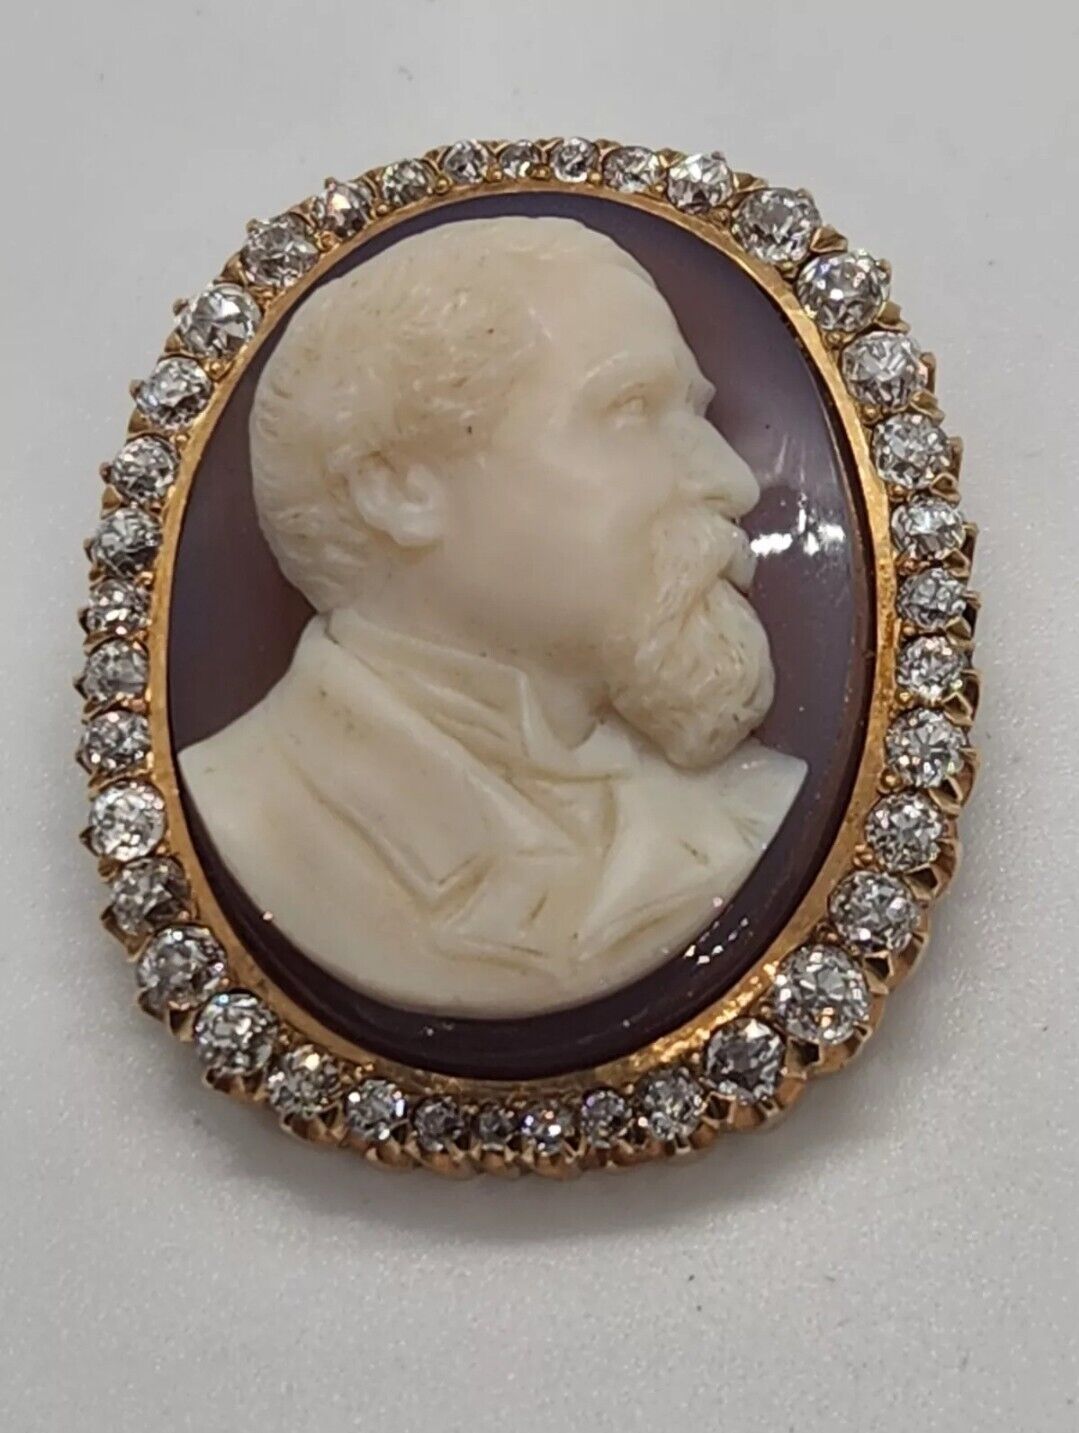 Antique Cameo Brooch Mint Condition 18kt Gold And Diamonds Edwardian Period